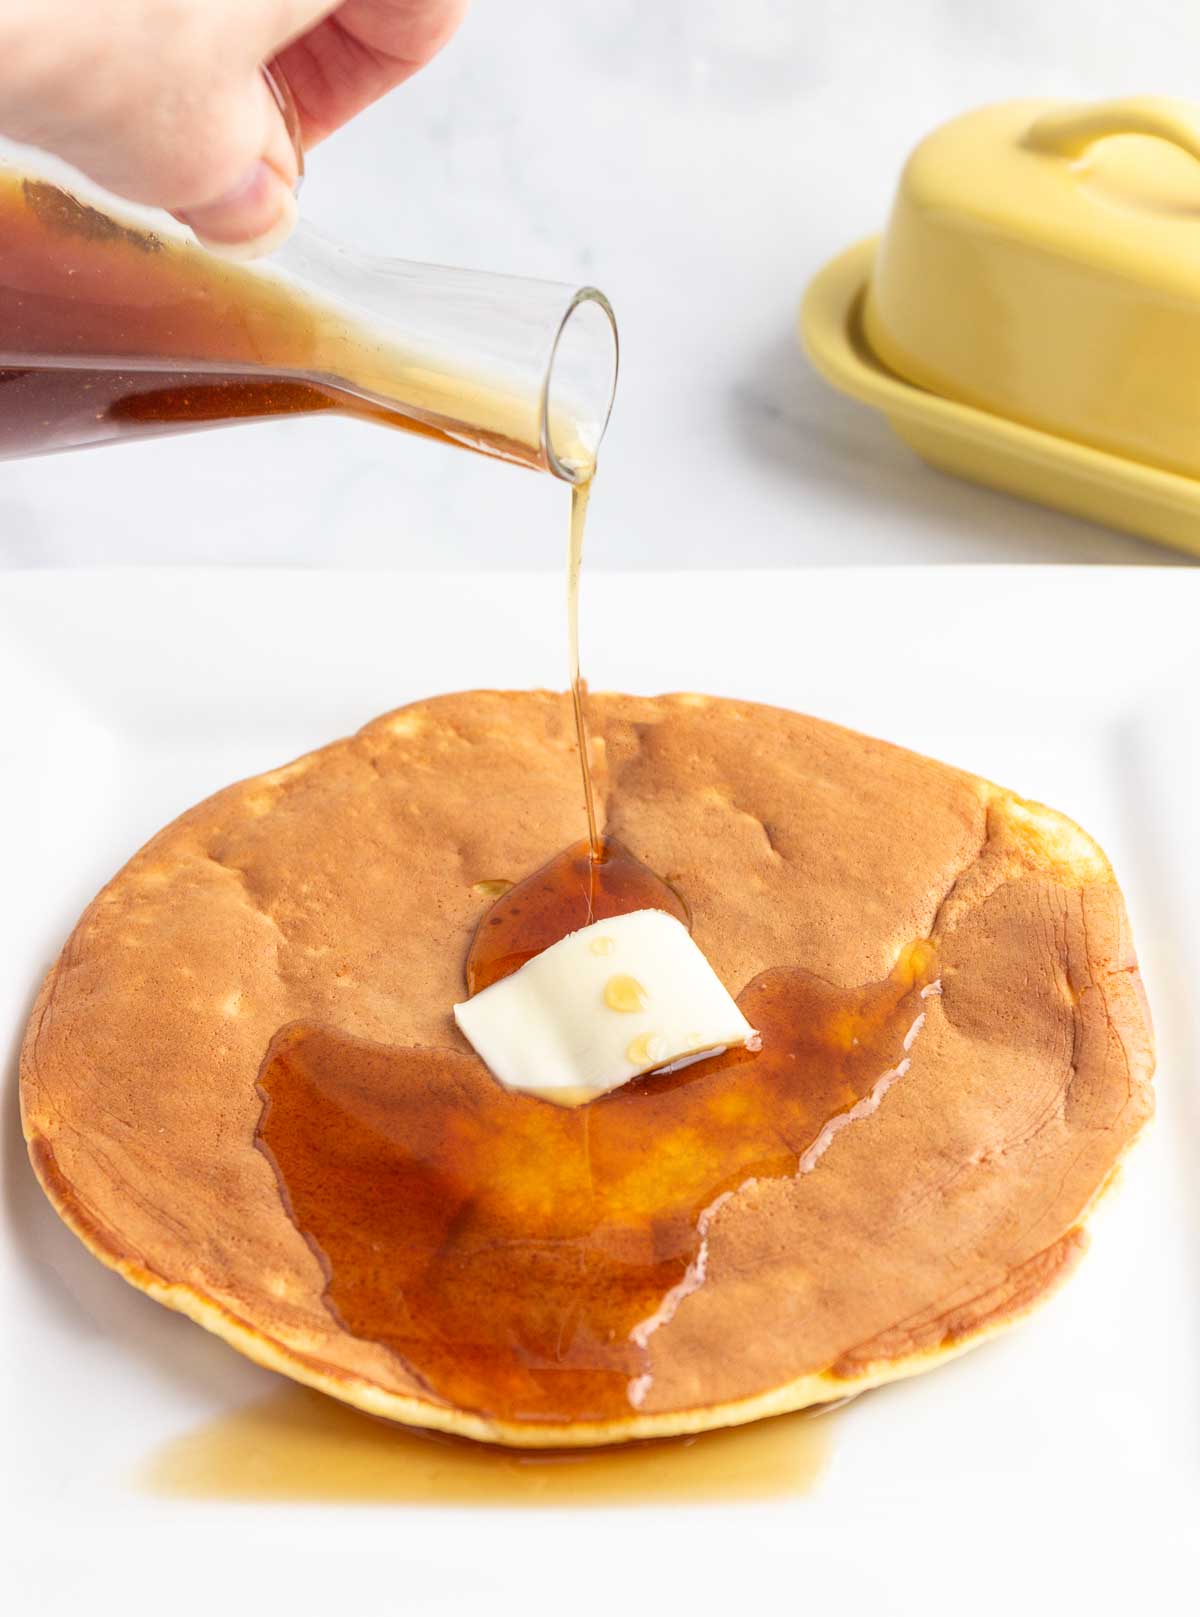 A large single fluffy low-carb pancake with syrup being poured on top.